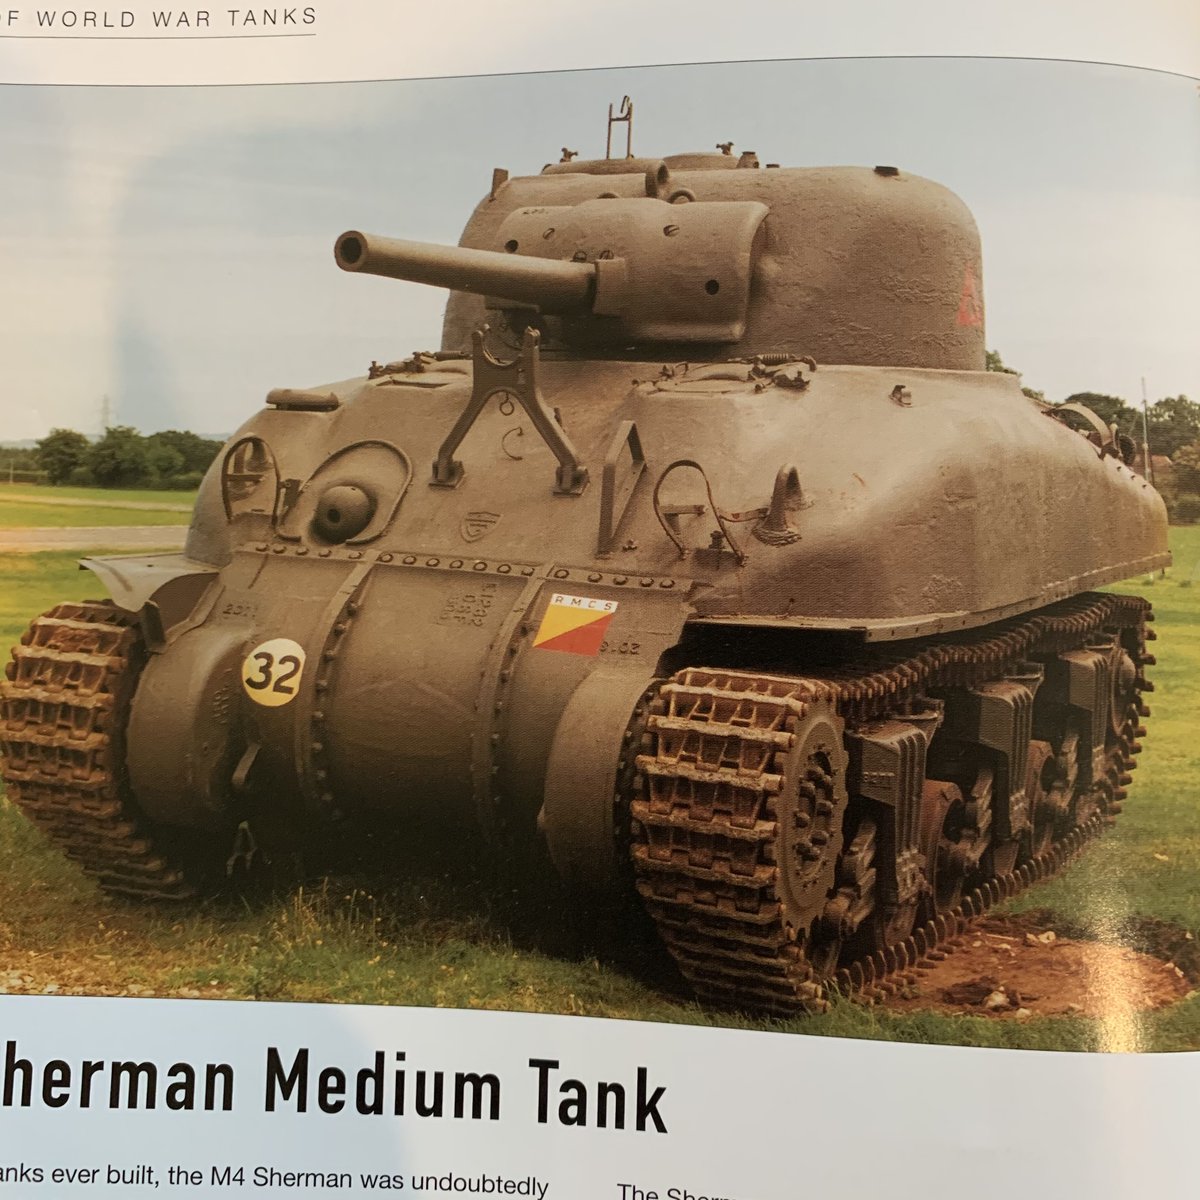 I wanted to share pics of something and figured I’d tie them into a short Tank Tuesday thread on the beloved Sherman.